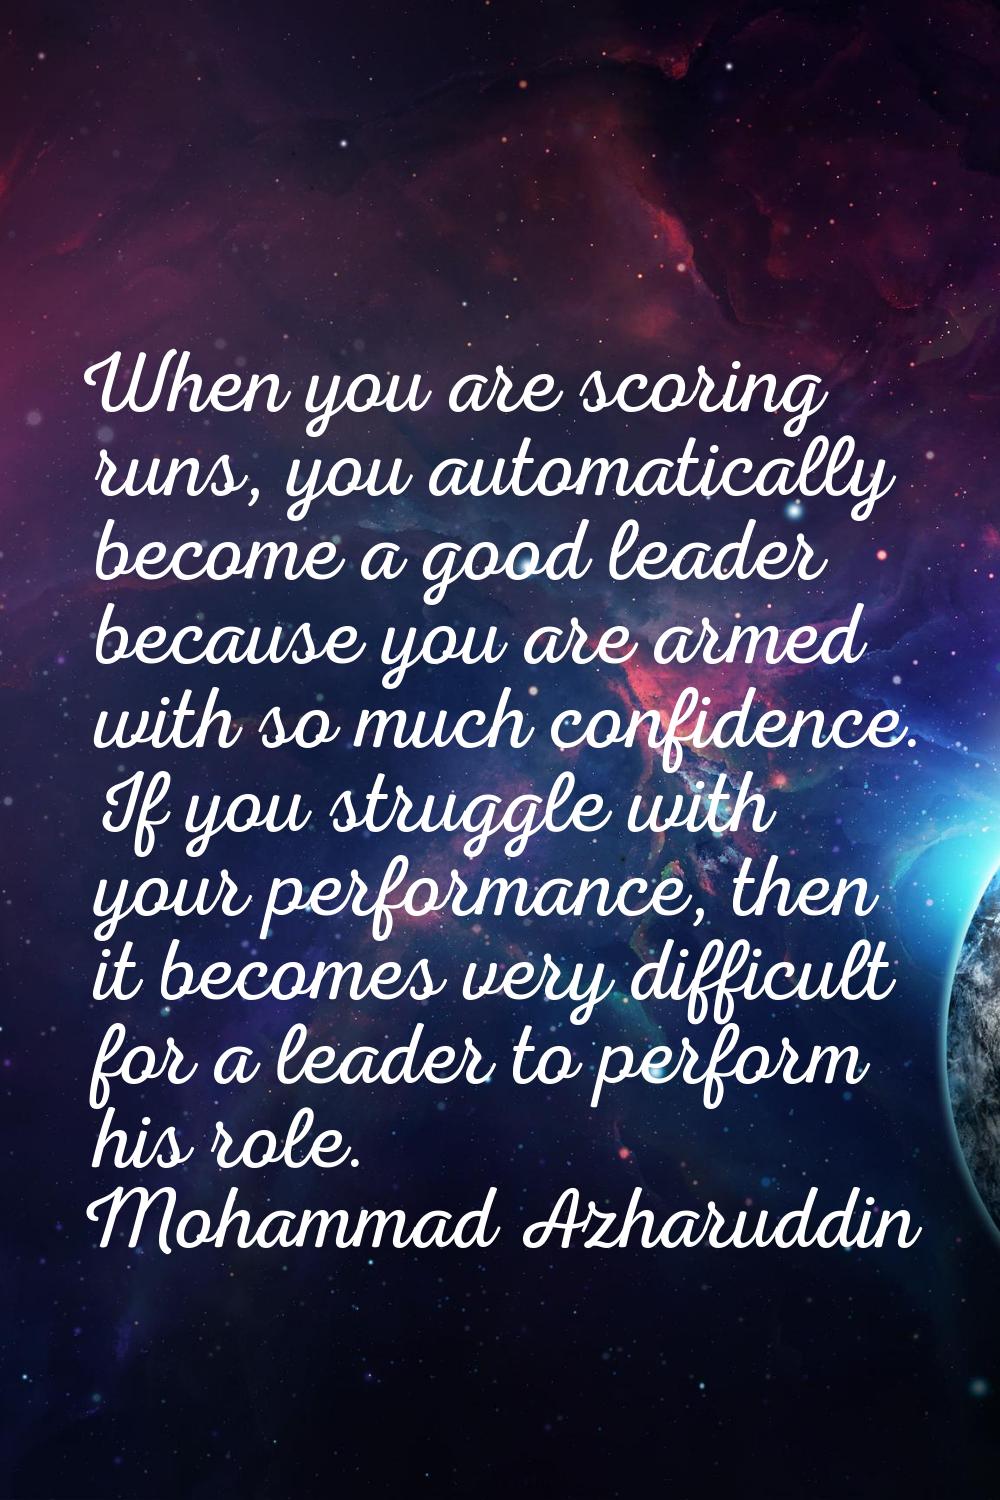 When you are scoring runs, you automatically become a good leader because you are armed with so muc